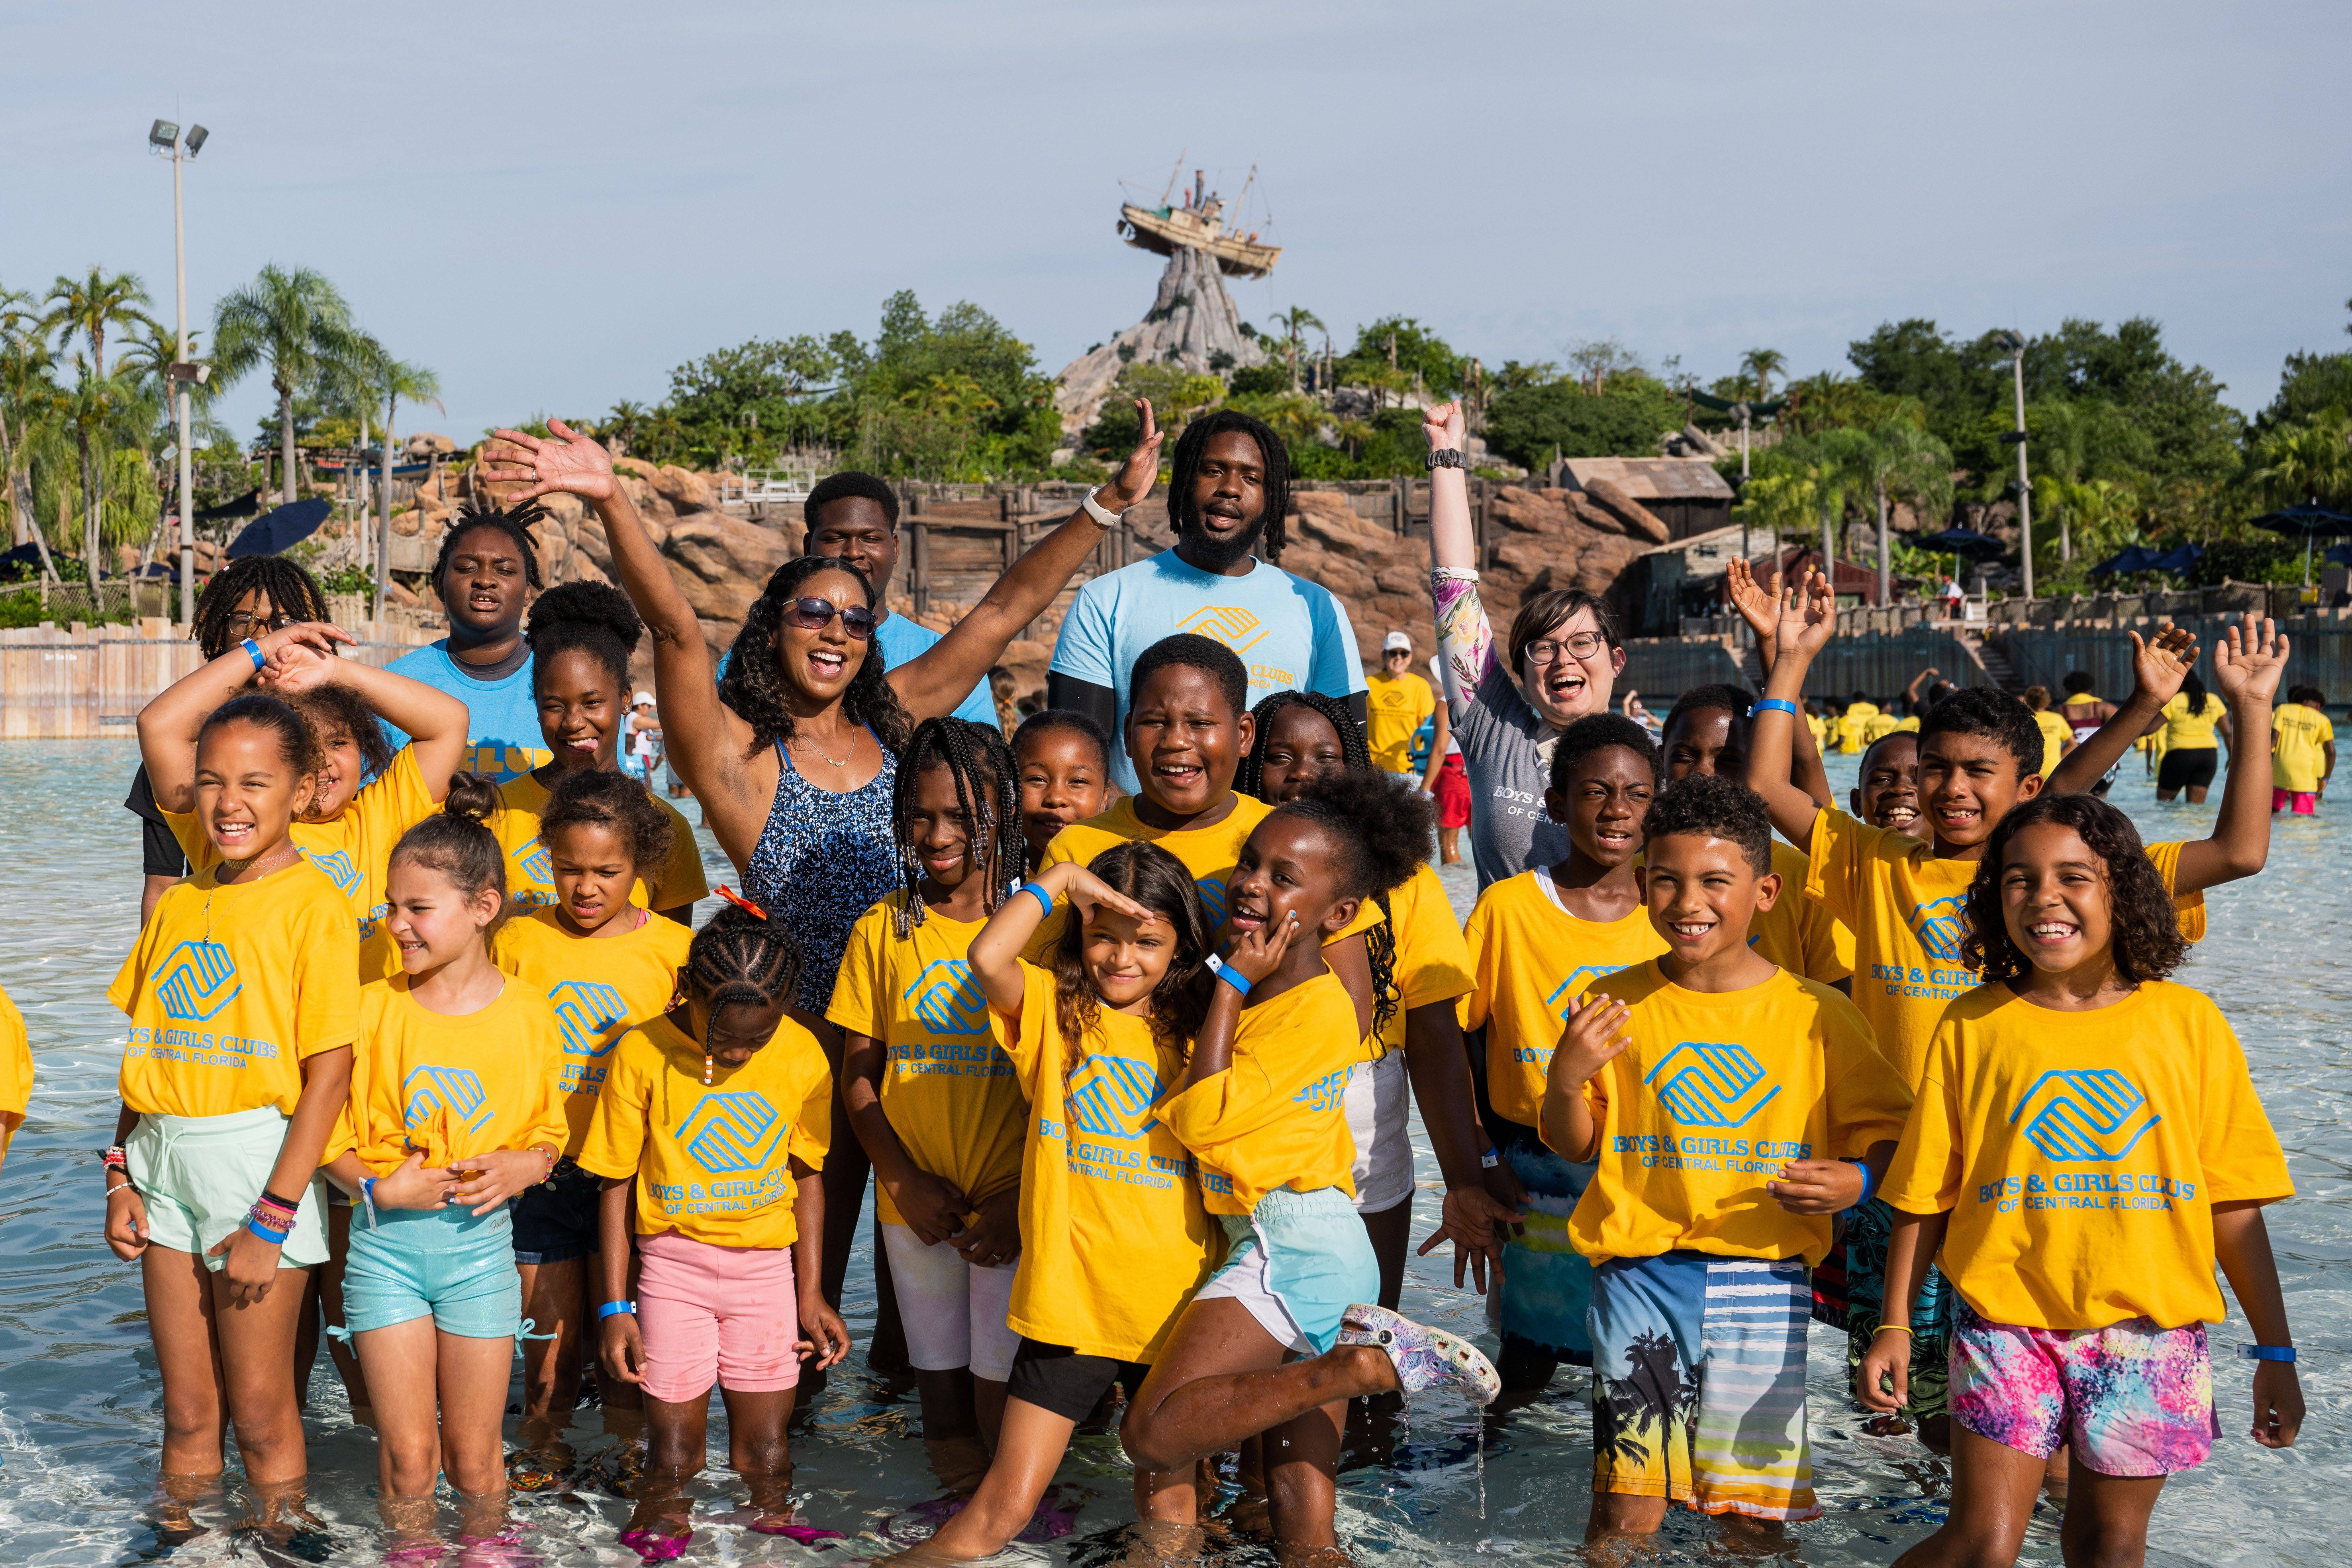 World's Largest Swimming Lesson Event at Disney's Typhoon Lagoon Water Park